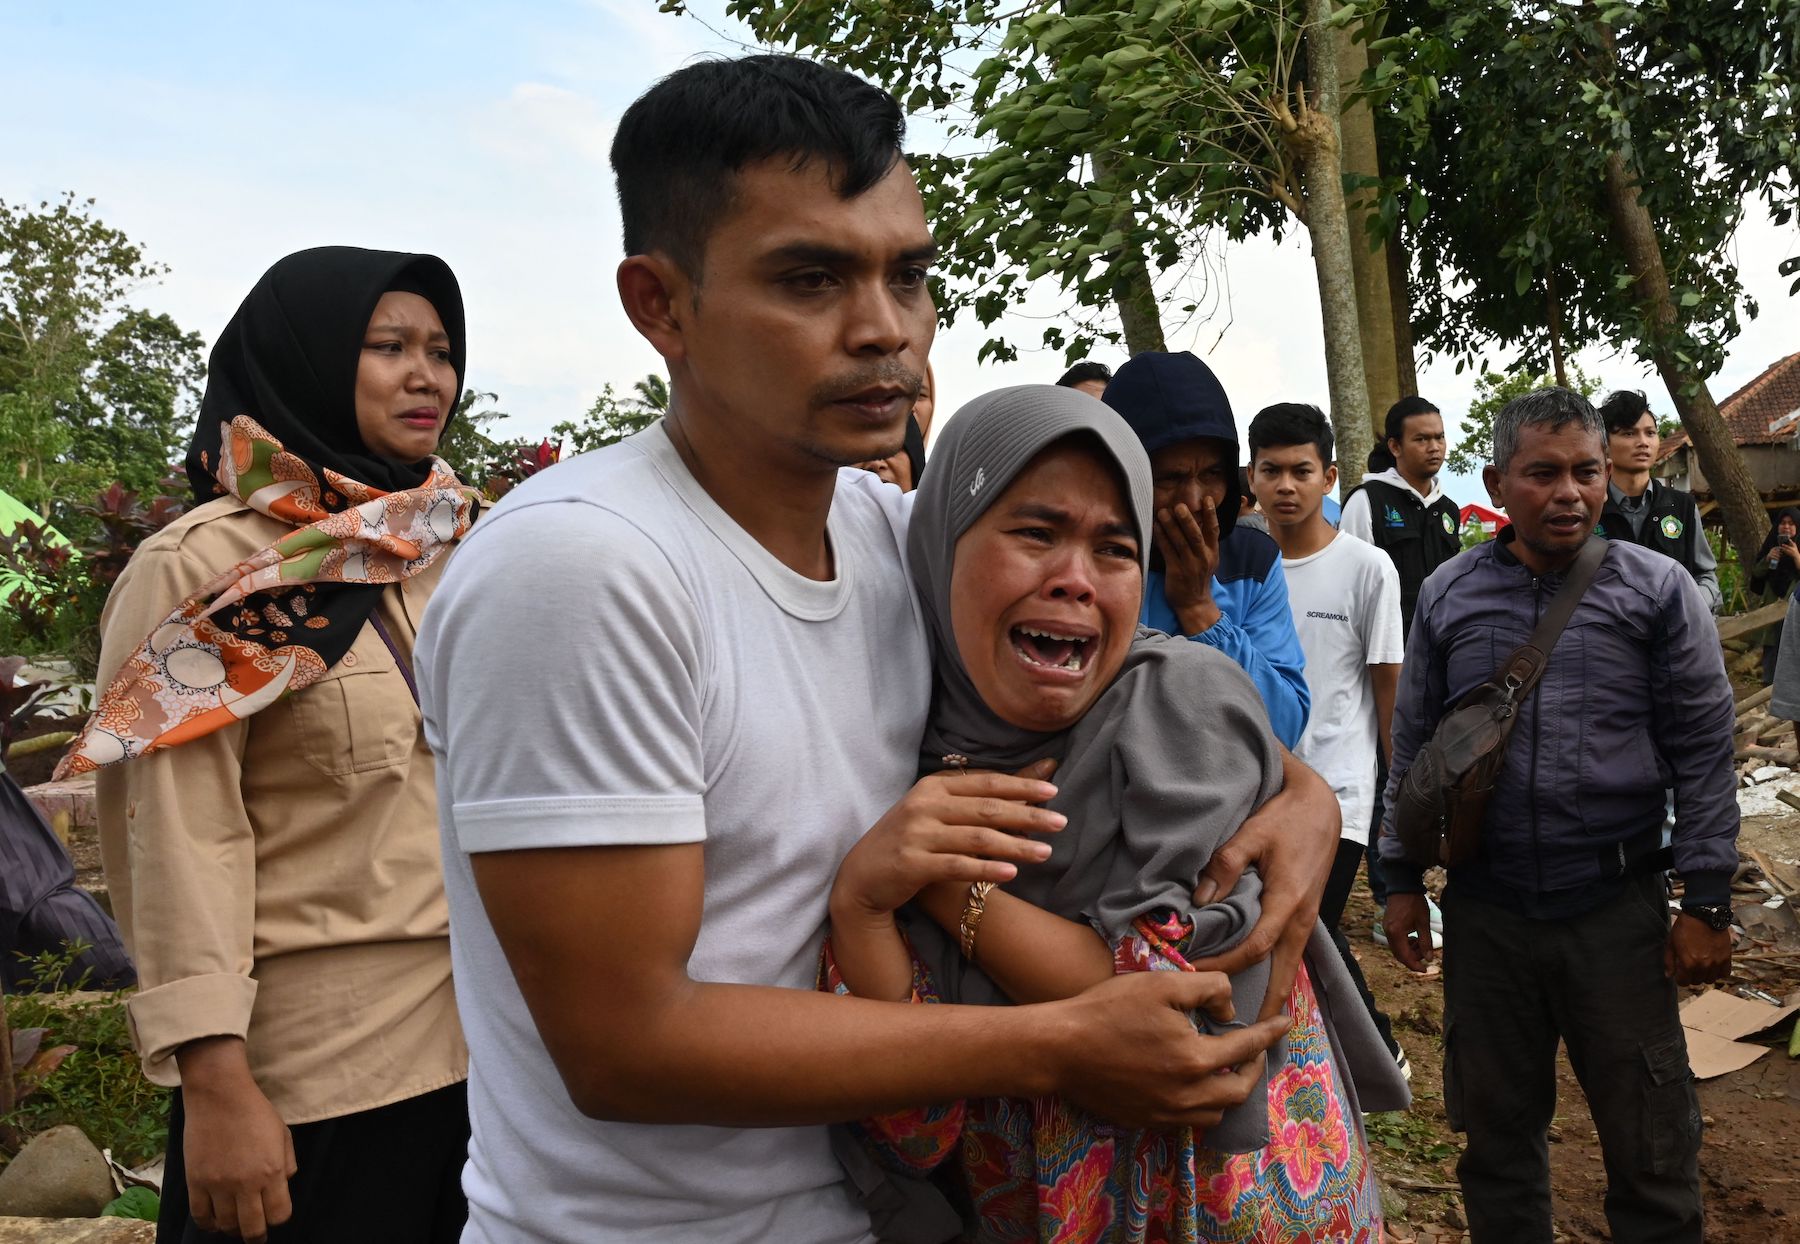 A Magnitude 5.6 Earthquake Struck Indonesia, Killing At Least 271 People And Injuring More Than 1,000